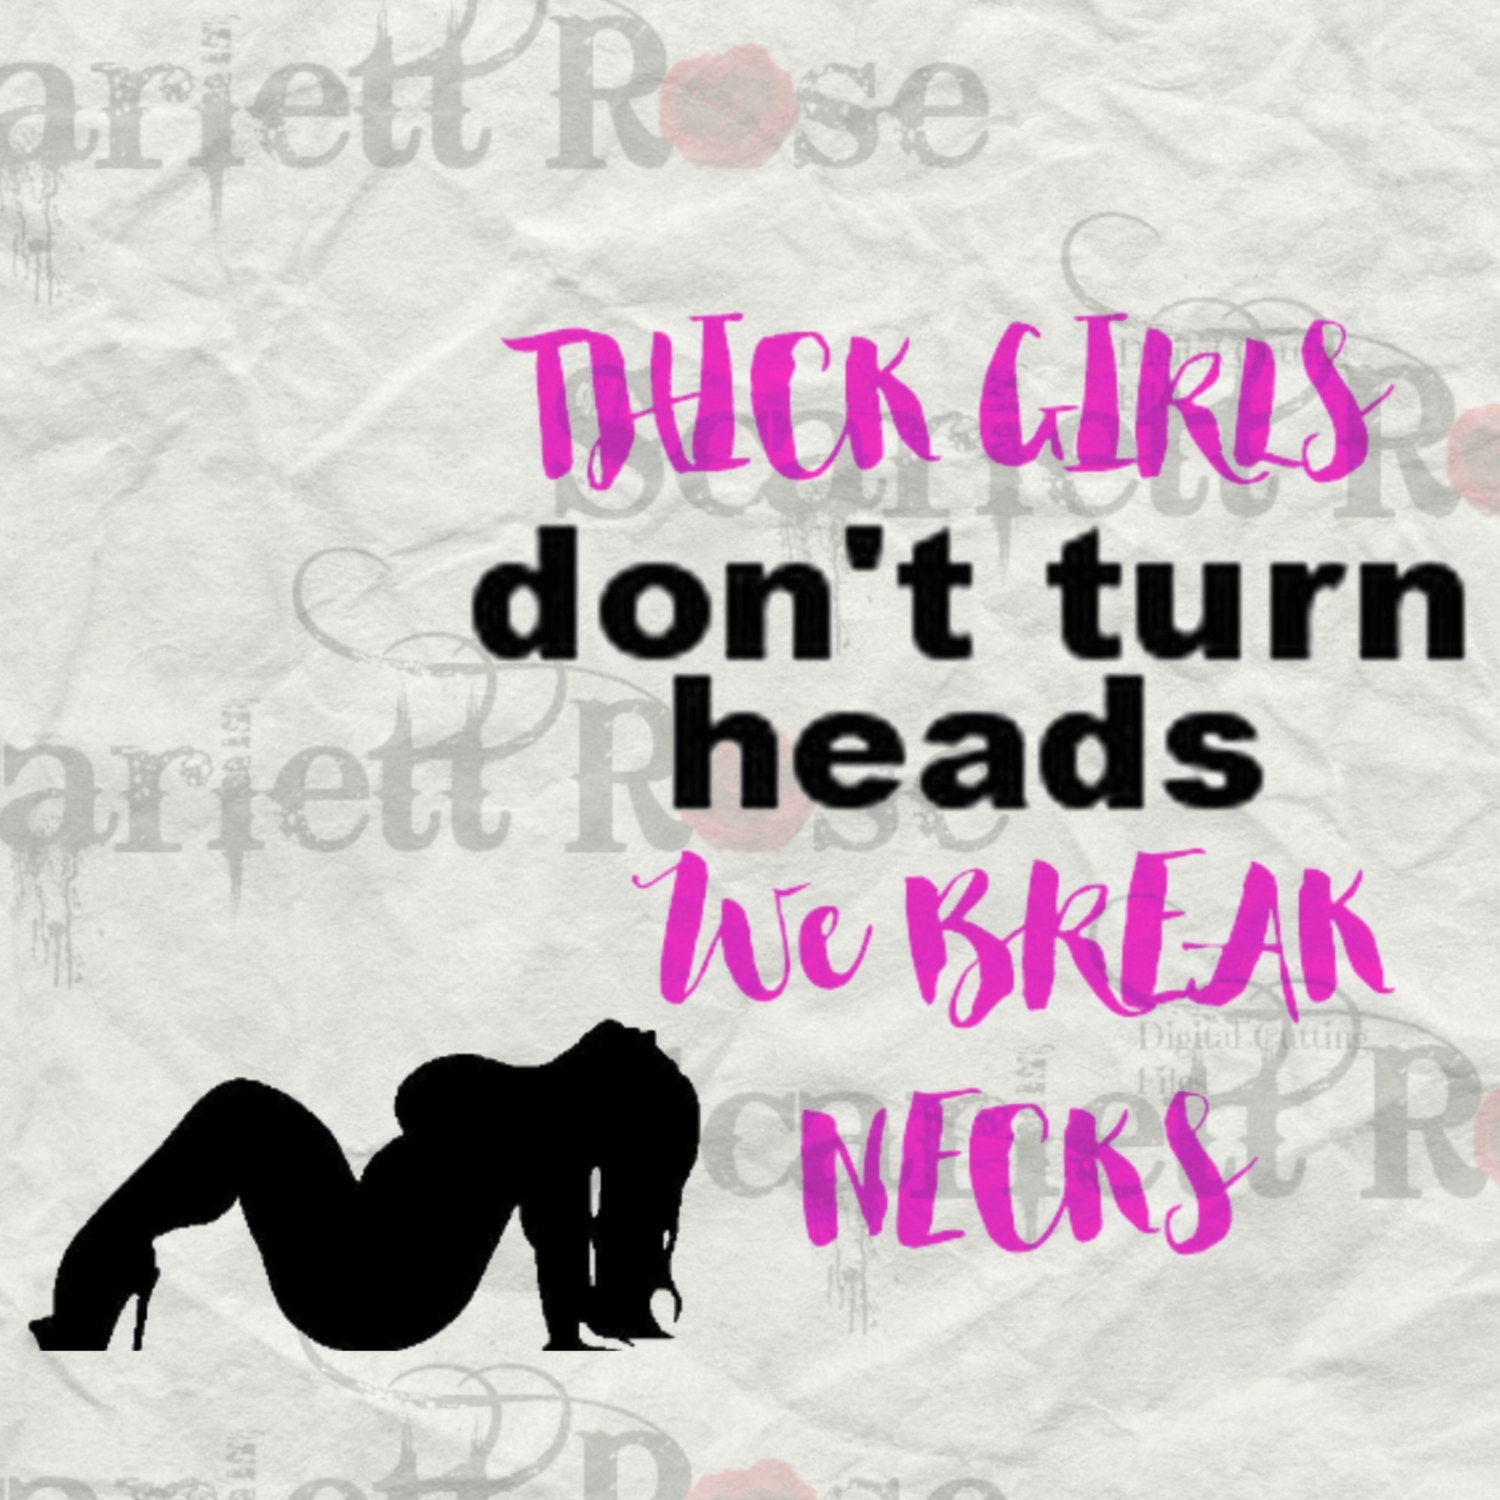 Download Thick Girls Don't Turn Heads SVG cutting file clipart in